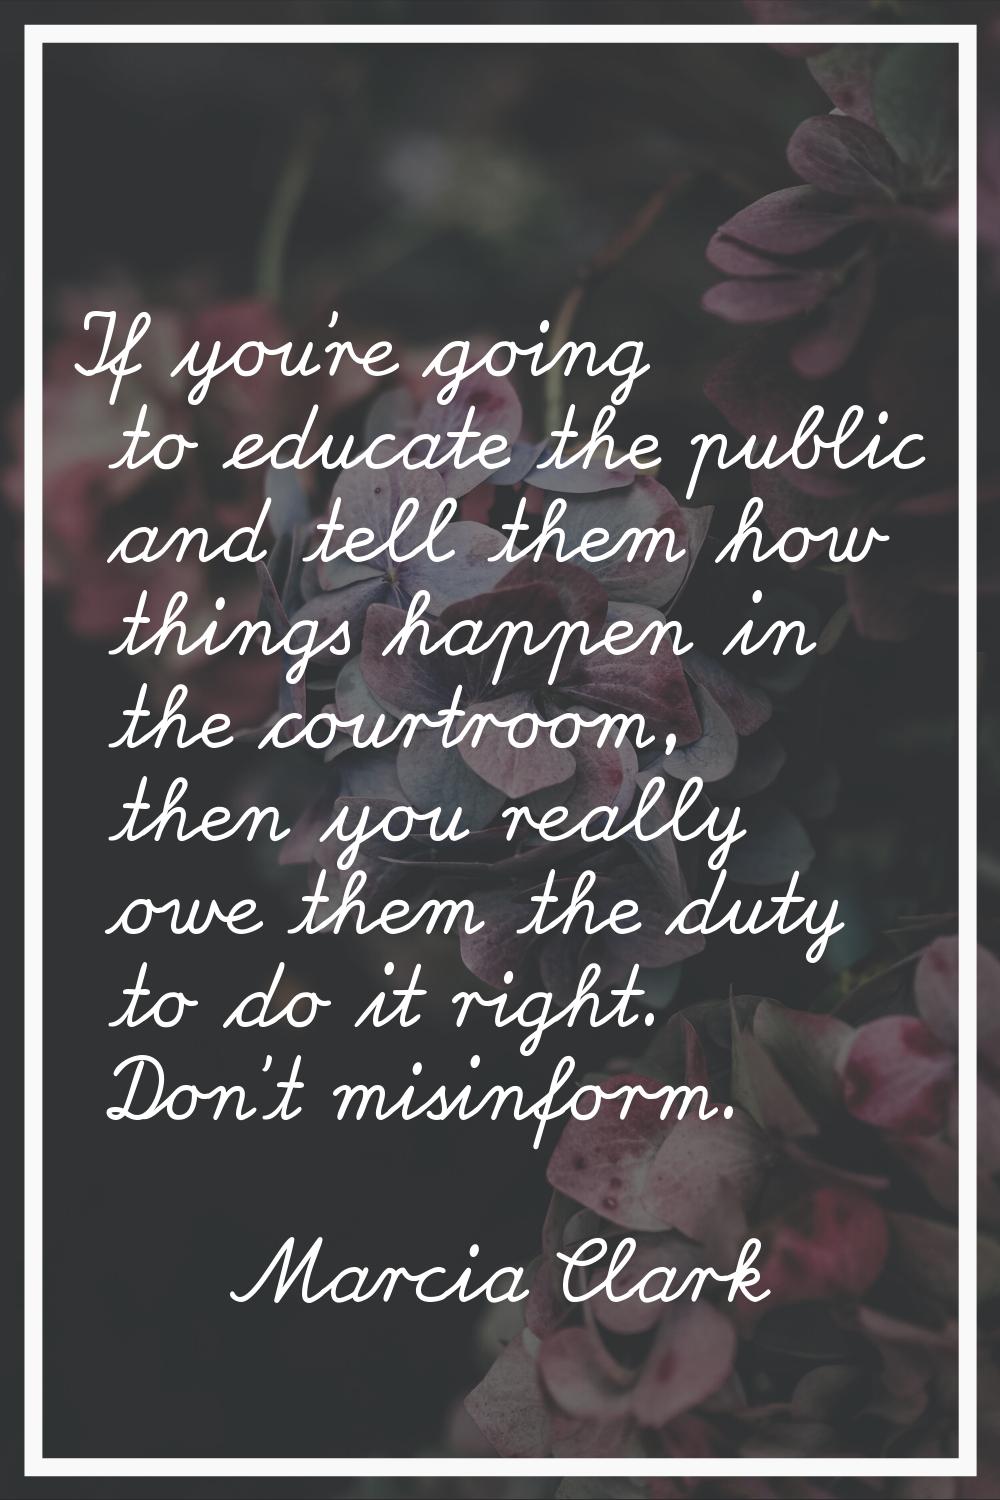 If you're going to educate the public and tell them how things happen in the courtroom, then you re